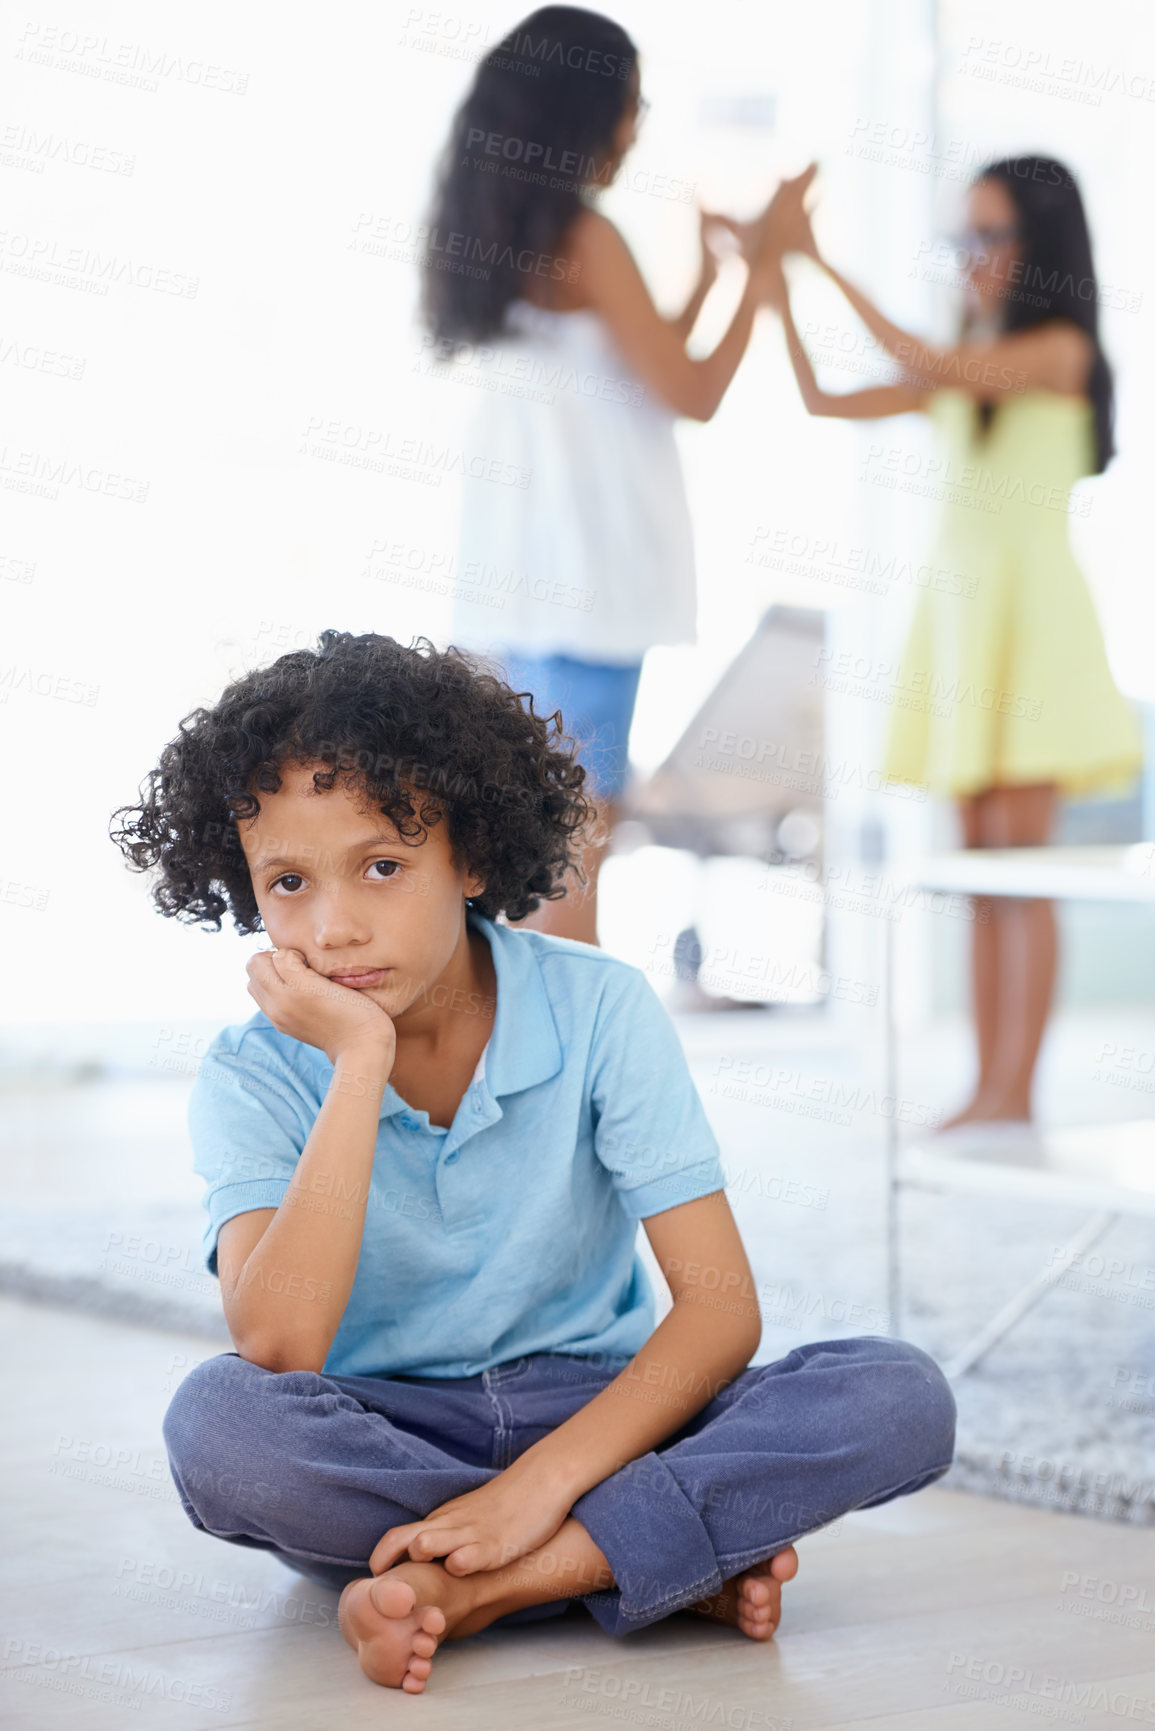 Buy stock photo Portrait of a sad-looking little boy sitting along with his sisters playing in the background